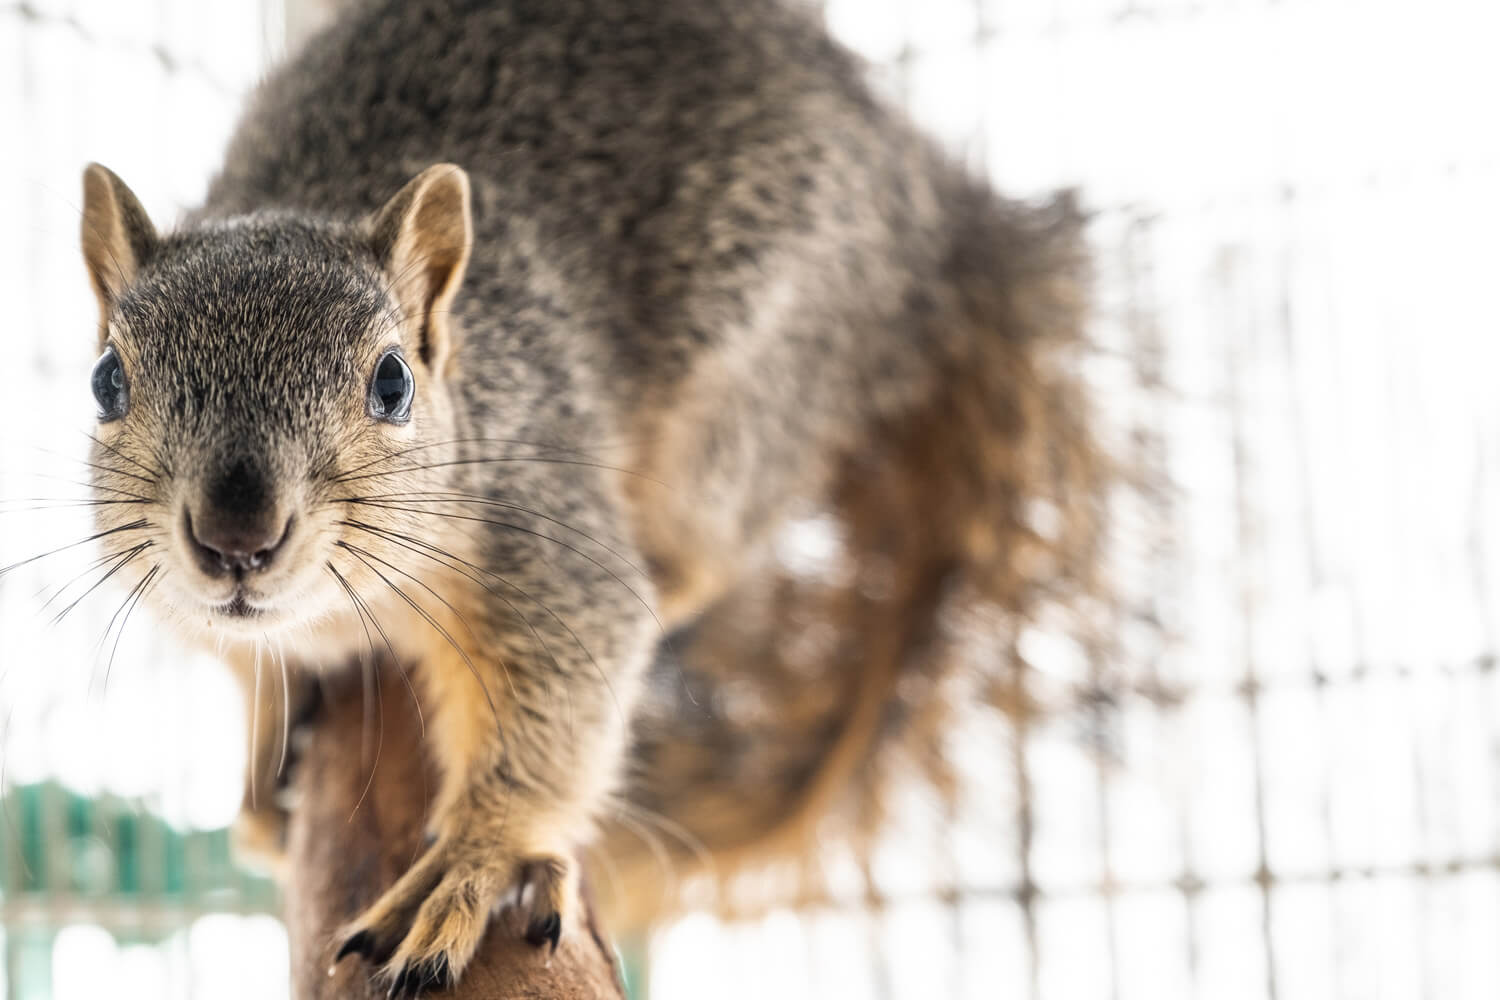 FUJIFILM Creators talk about how a lend can affect your message. In this image, Rebecca Gaal uses a standard zoom to frame a squirrel on a perch in a cage at a rescue centre.